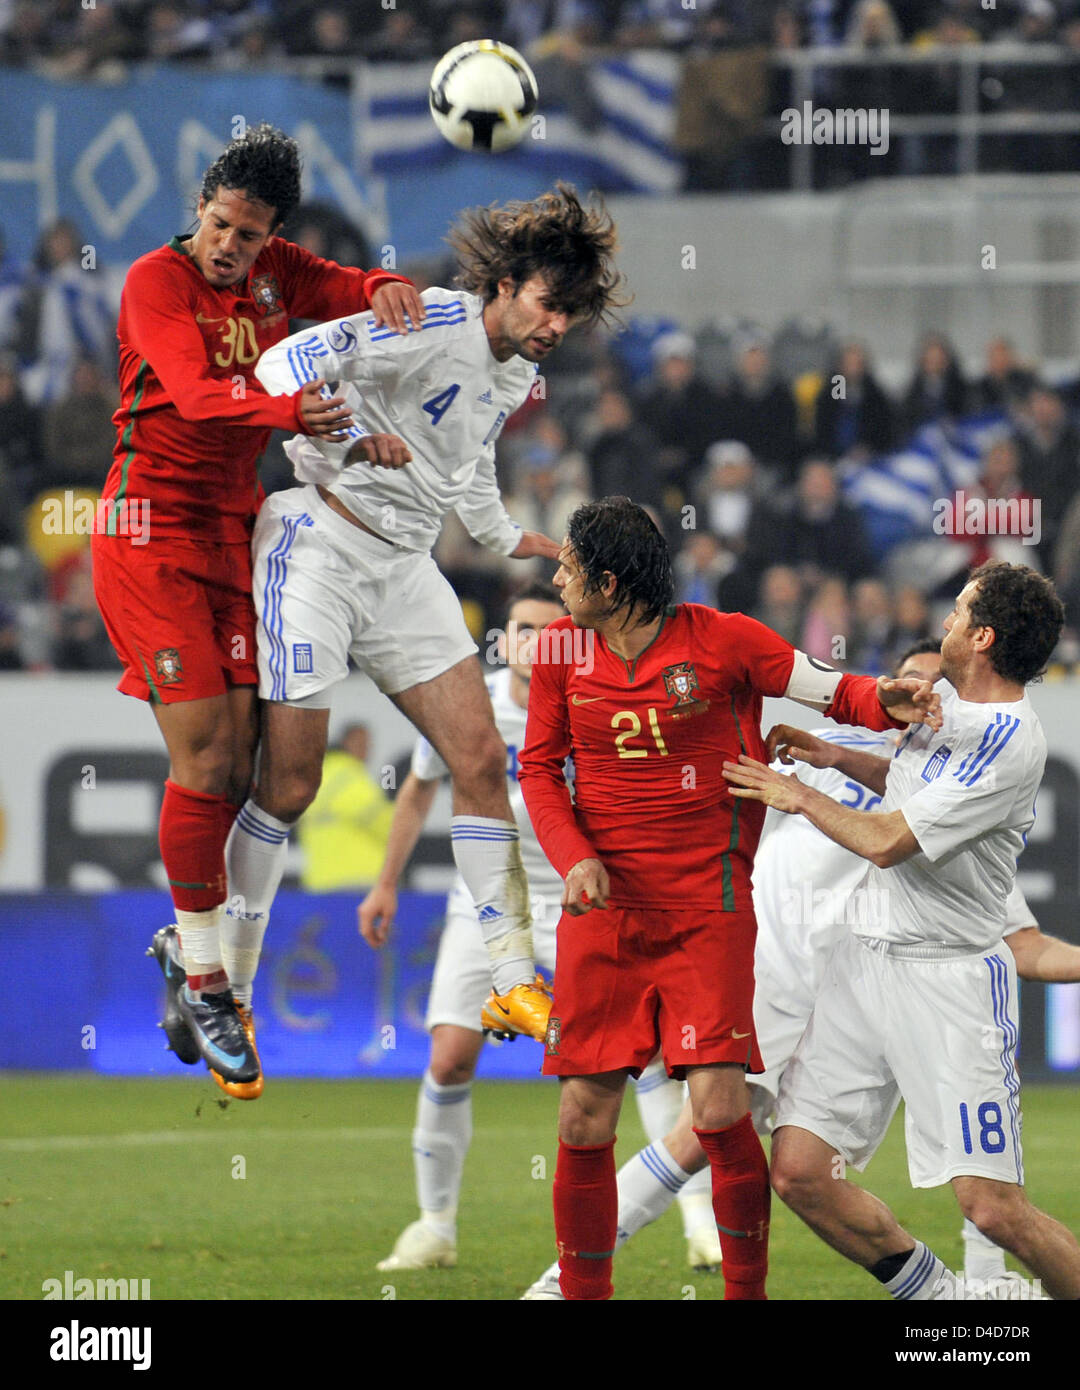 Portugal's Bruno Alves (L) and Greece's Georgios Samaras (2-L) rise for a heading duel in the test cap Portugal v Greece at LTU Arena stadium in Duesseldorf, Germany, 26 March 2008. Greece defeated Portugal 2-1. Photo: Achim Scheidemann Stock Photo